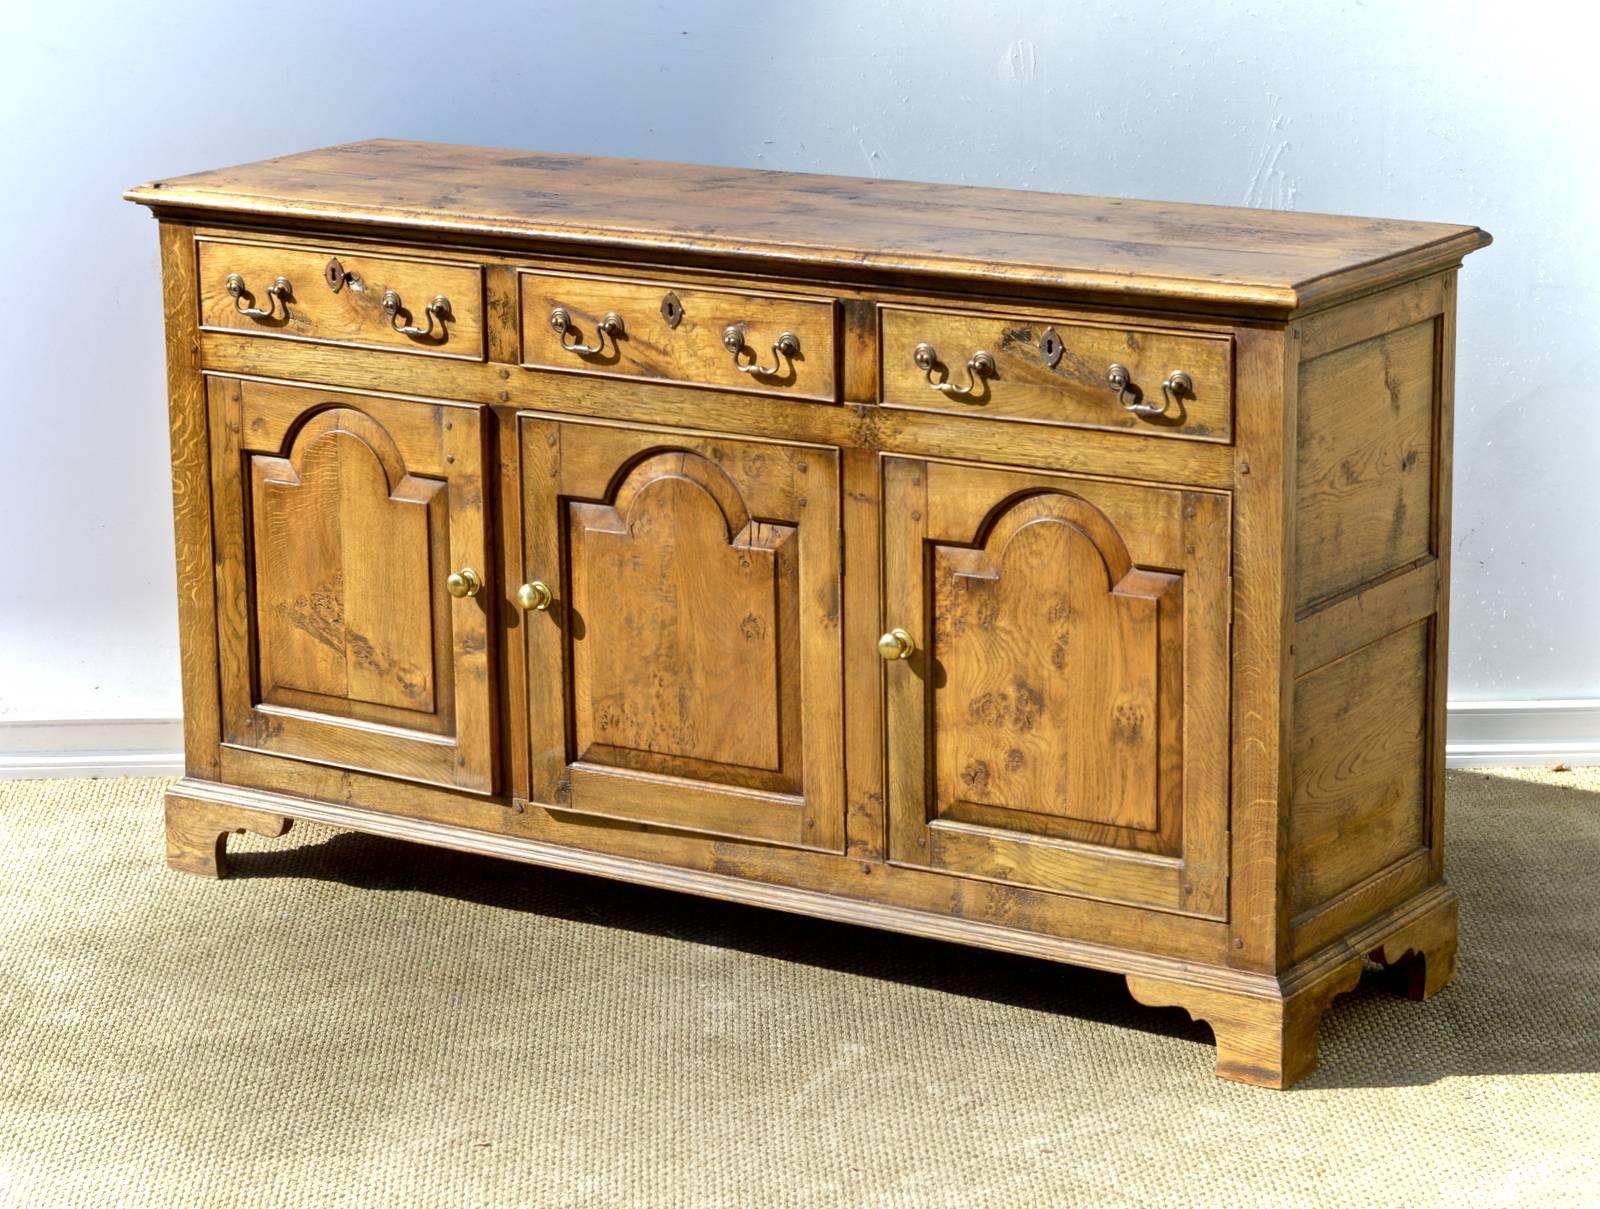 An attractive and narrow Welsh dresser base in the late 18th century style. The vintage 1970 buffet has a slender and ogee edged top resting on three ample sized drawers that reside above an open storage cabinet that is adorned with three tombstone